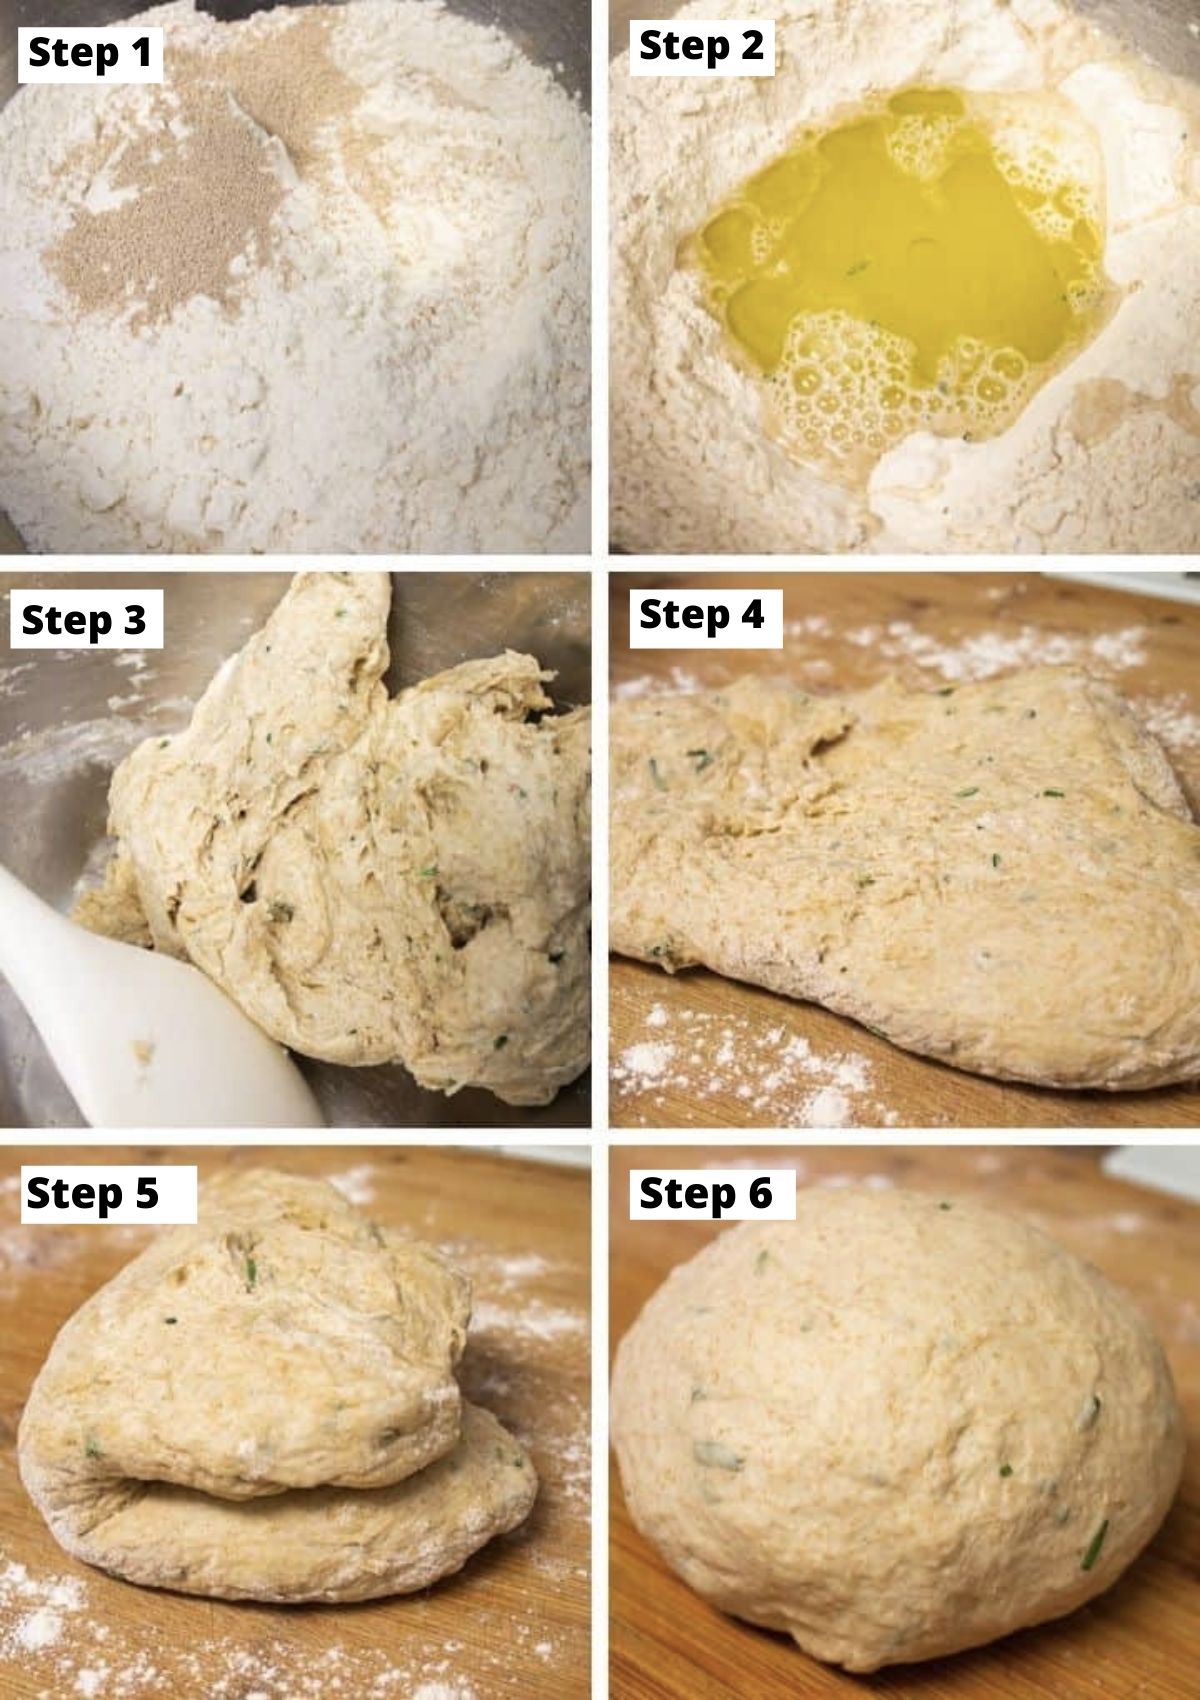 Process images for making focaccia dough. Combining flour and yeast, adding water and oil, mixing together, kneading, and forming dough into a ball. 